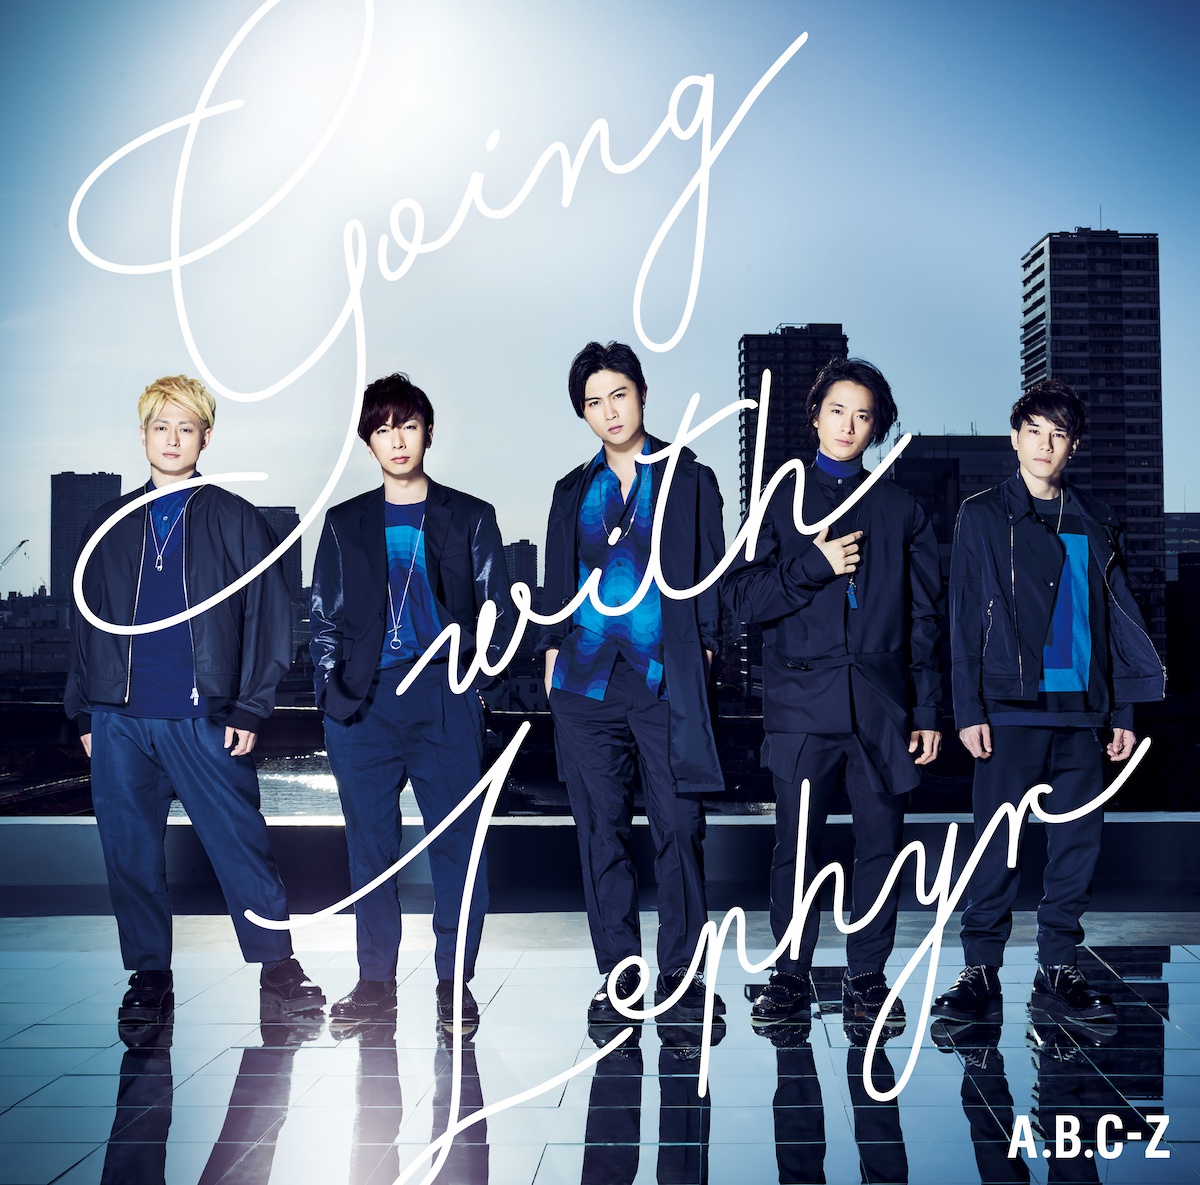 『A.B.C-Z - Saw me tight 歌詞』収録の『Going with Zephyr』ジャケット